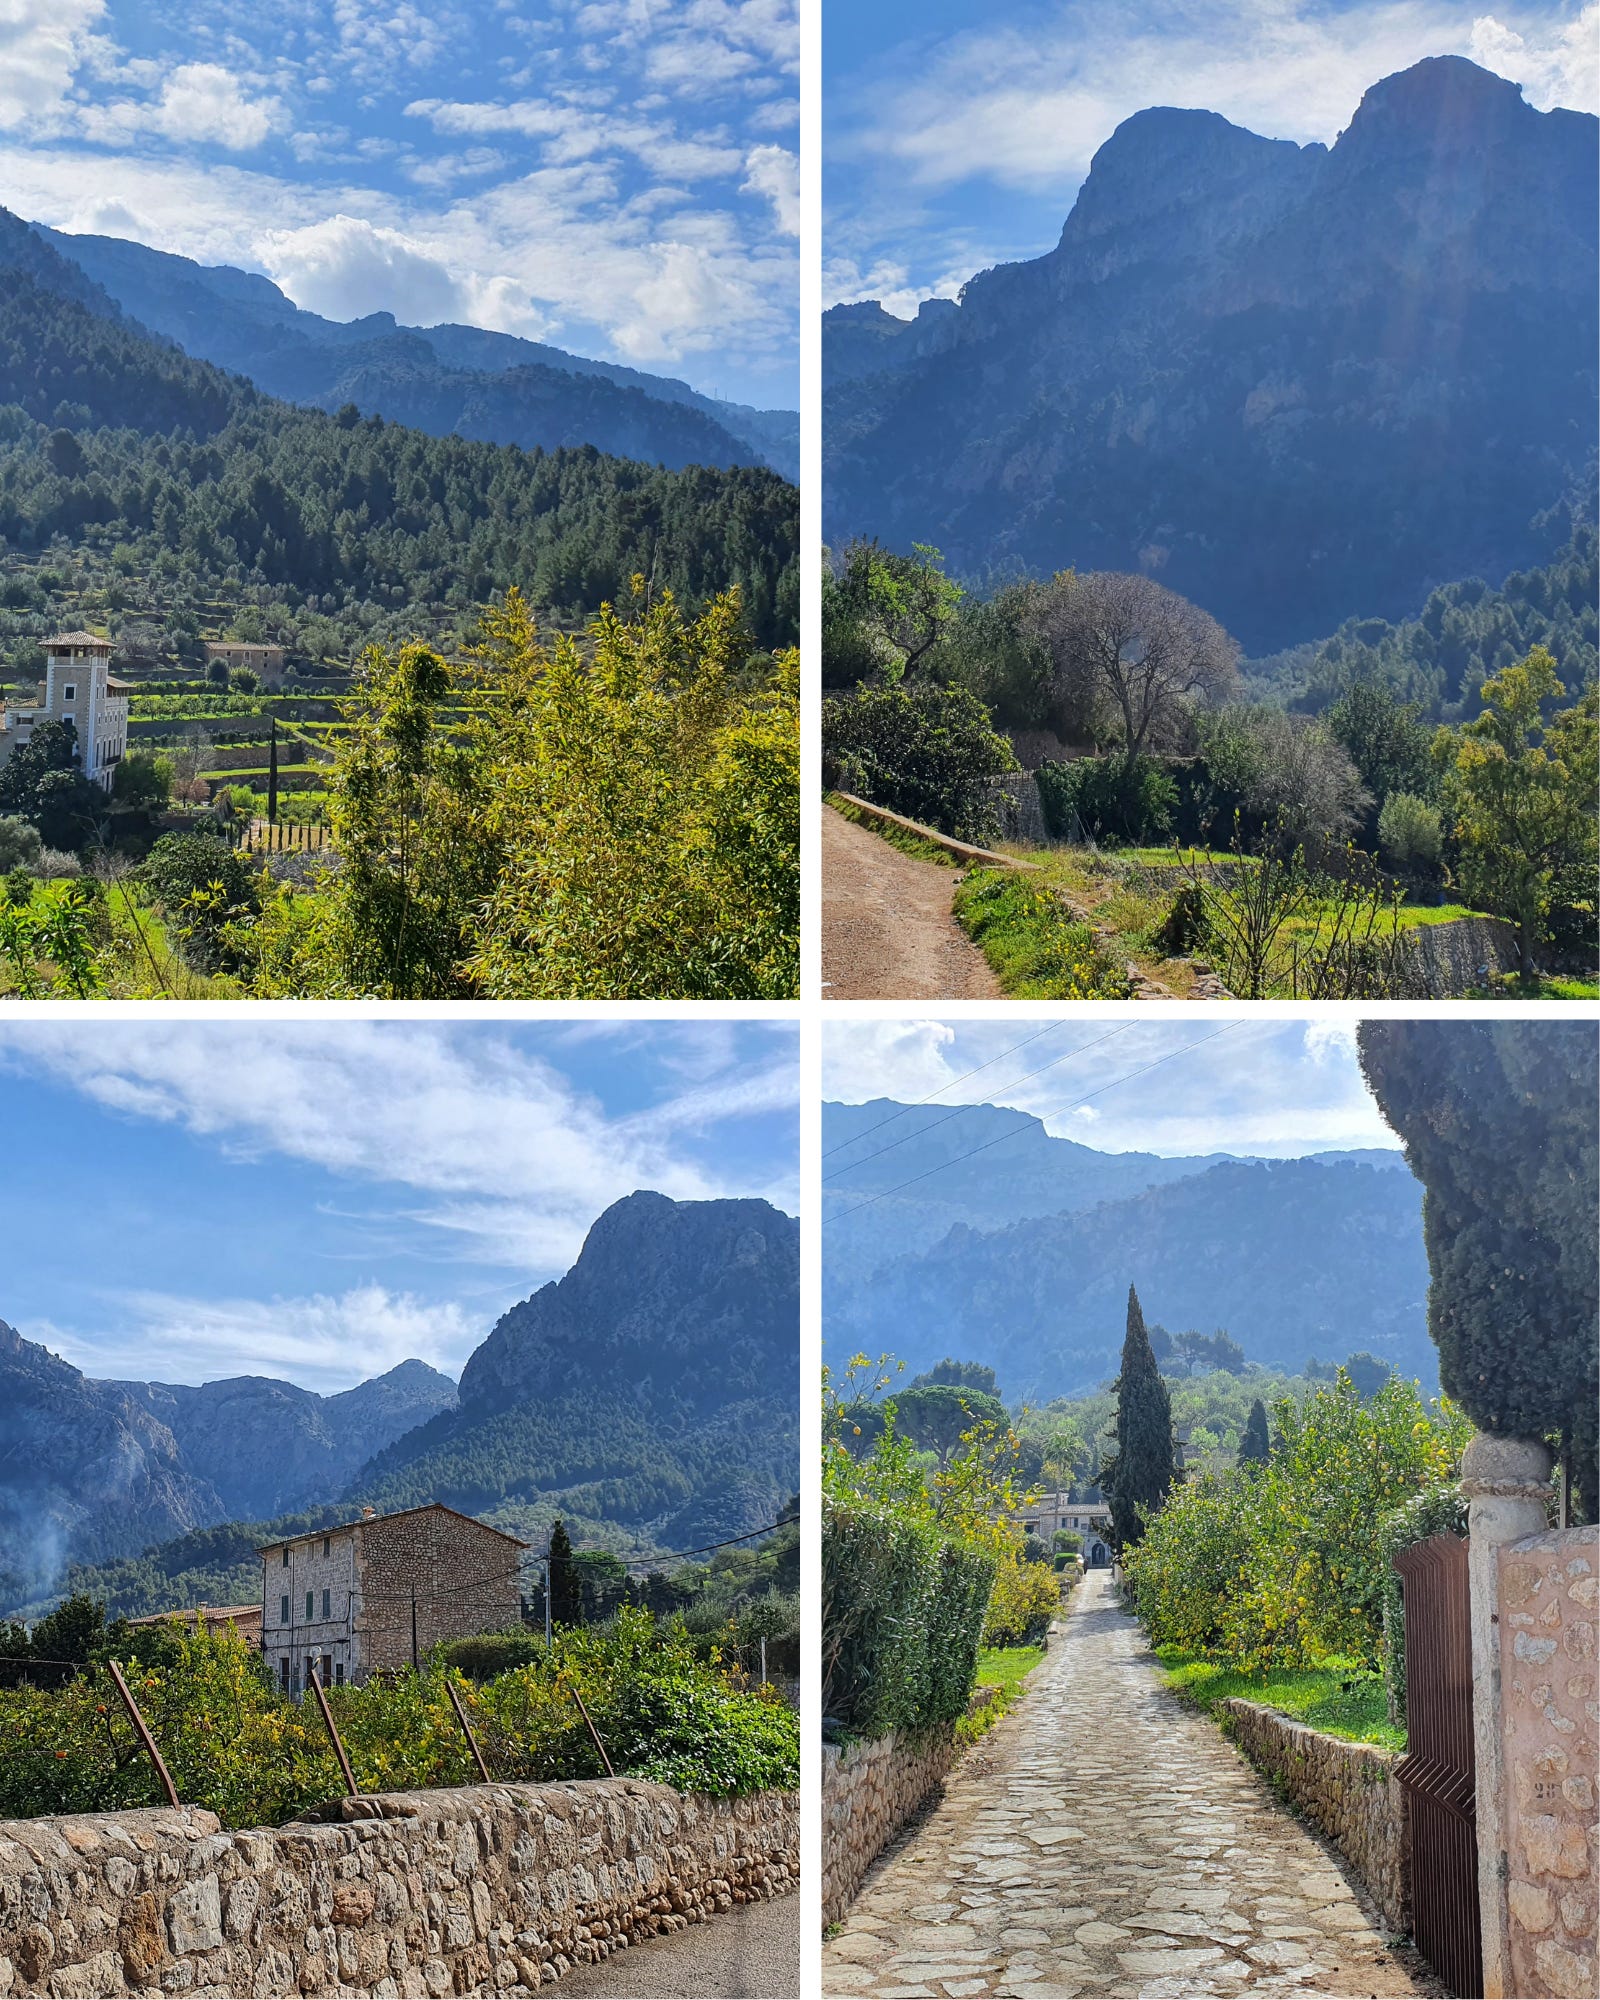 Scenes on the road from Soller to Biniaraix